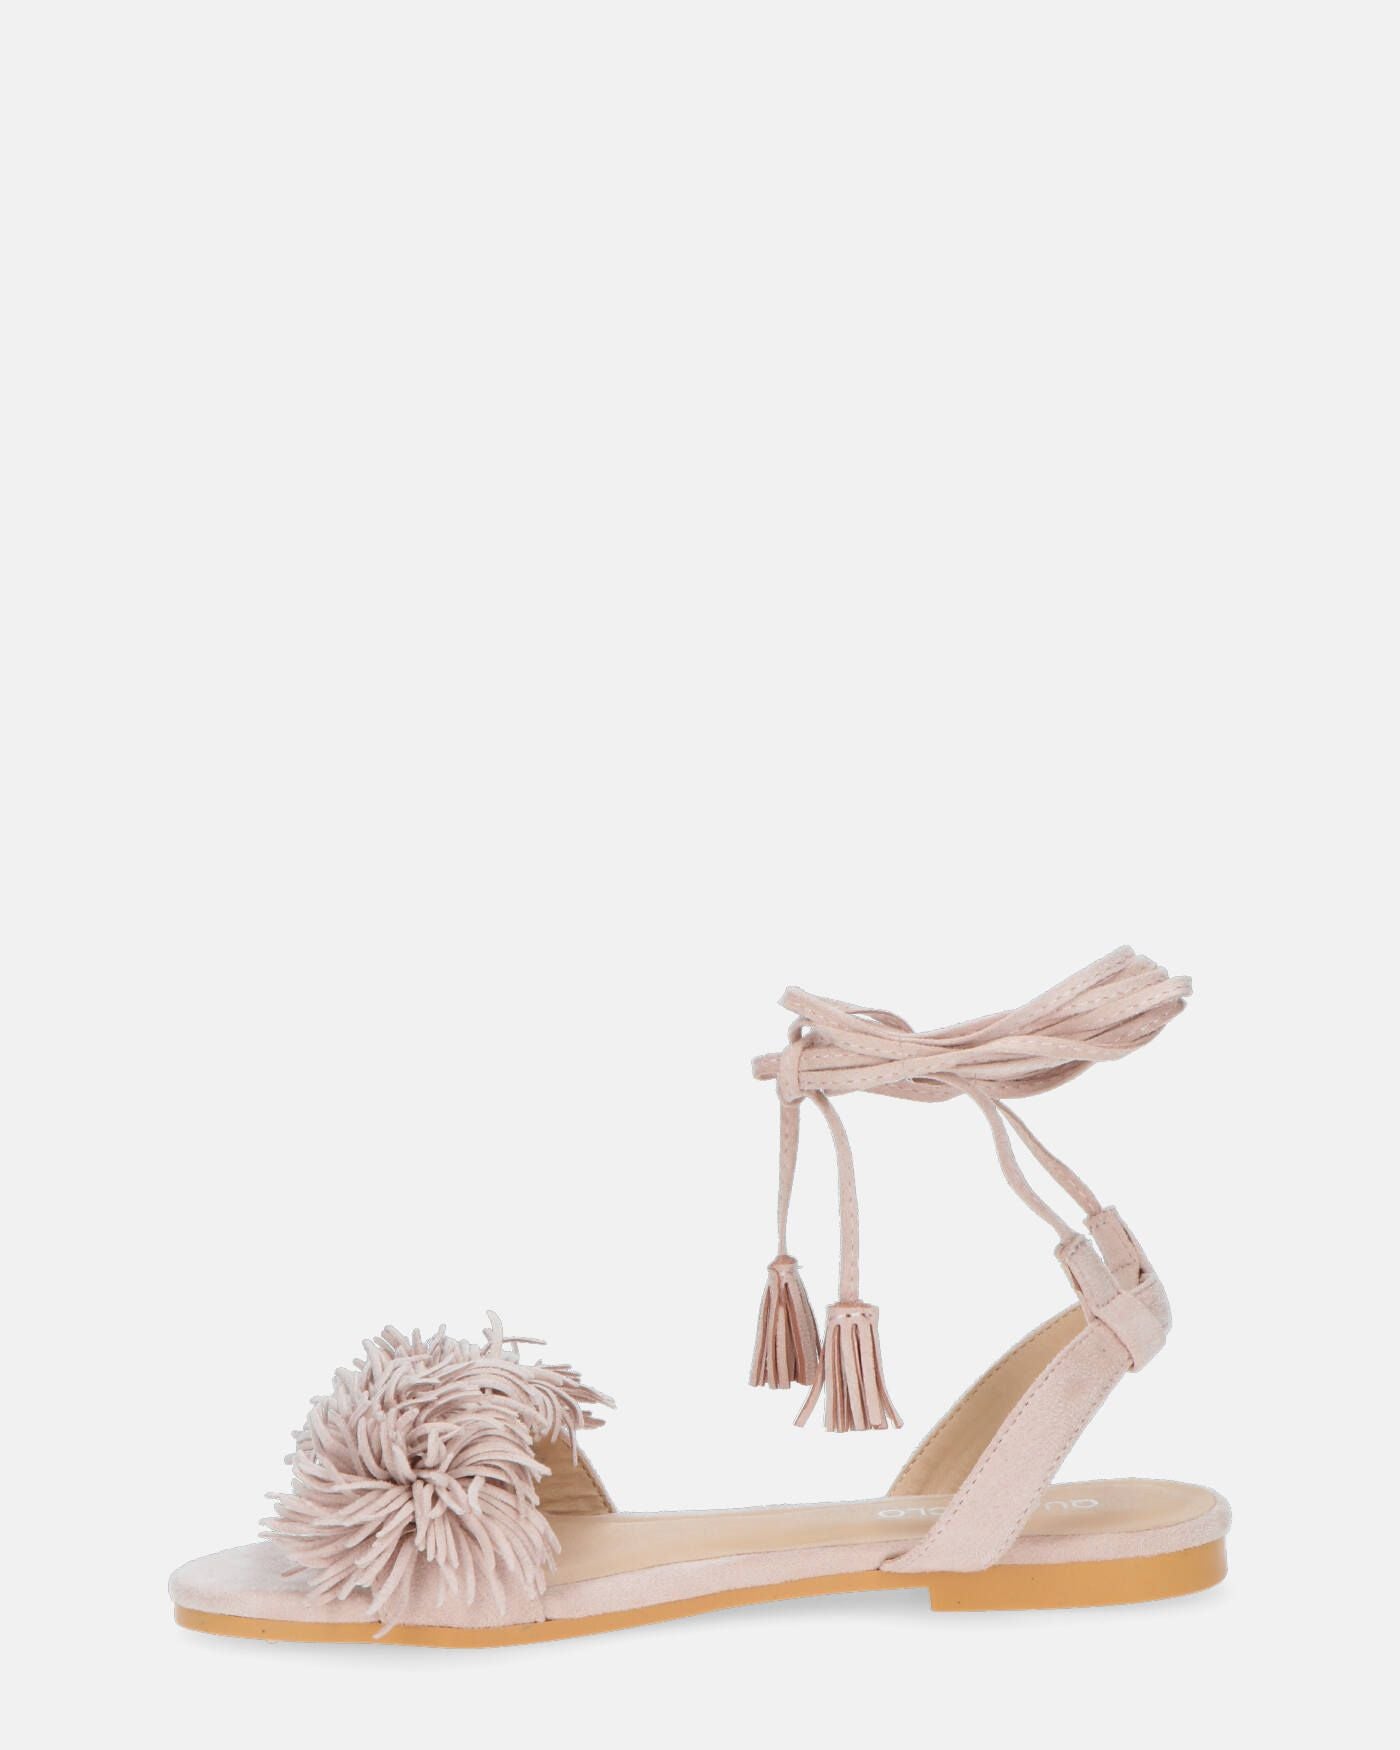 VALERY - lace up flat sandals in beige